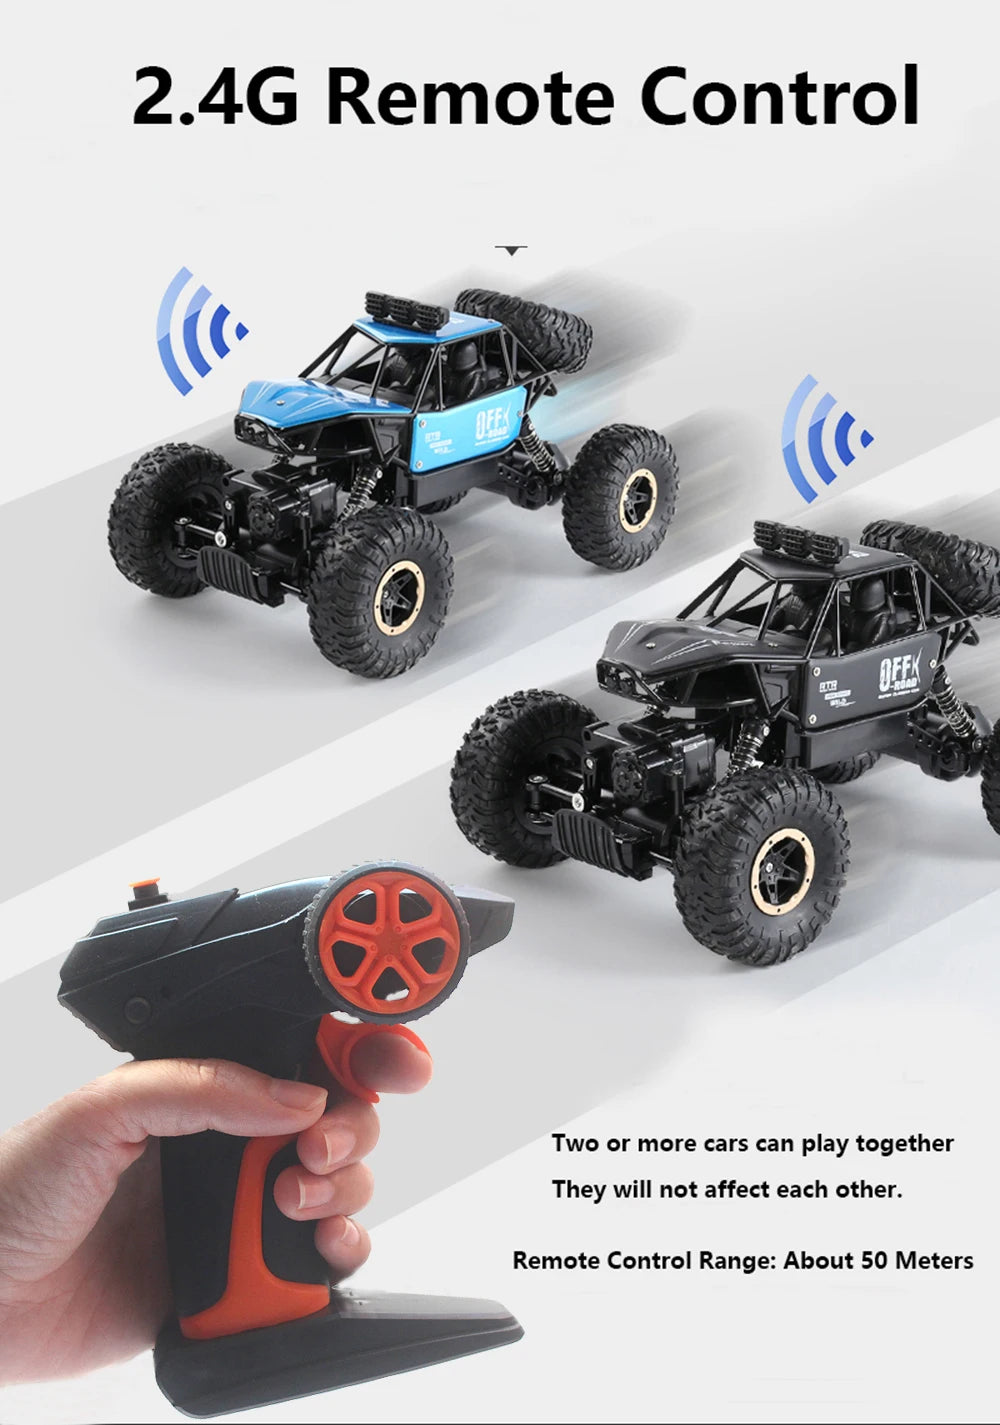 2.4G Remote Control Mu 2 Two or more cars can play together will not affect each other